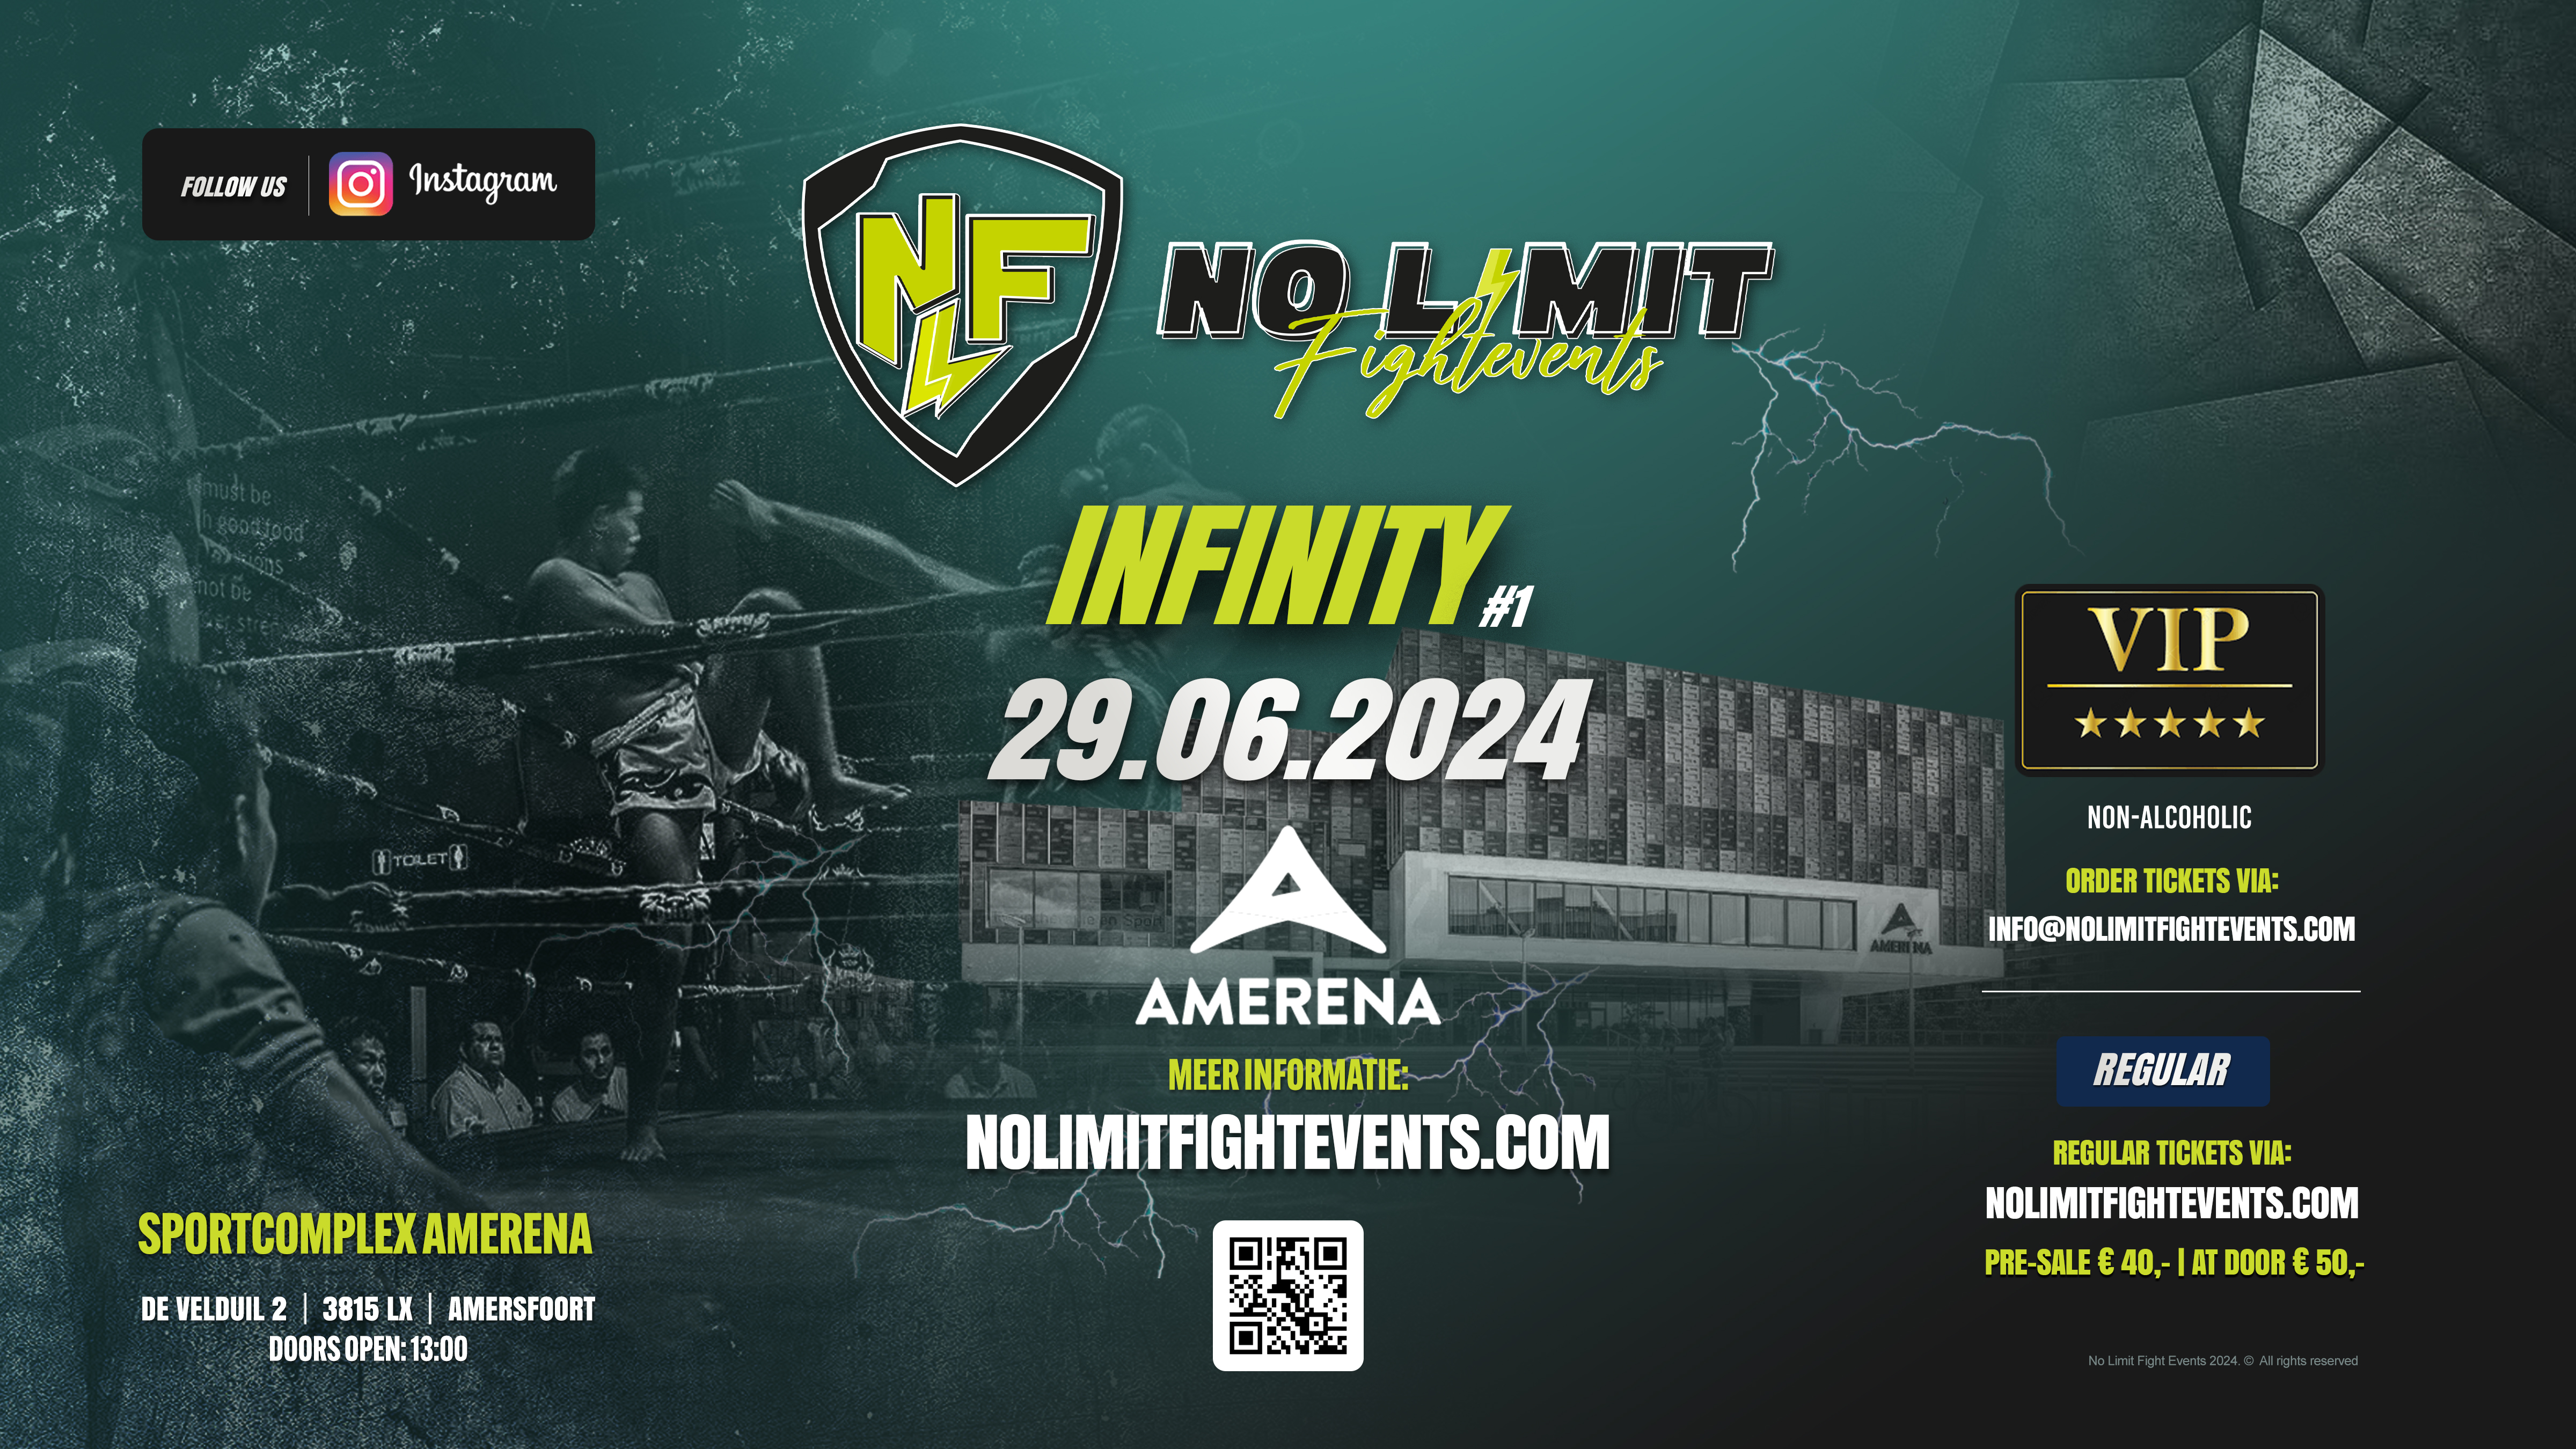 NO LIMIT FIGHTEVENTS | INFINITY#1